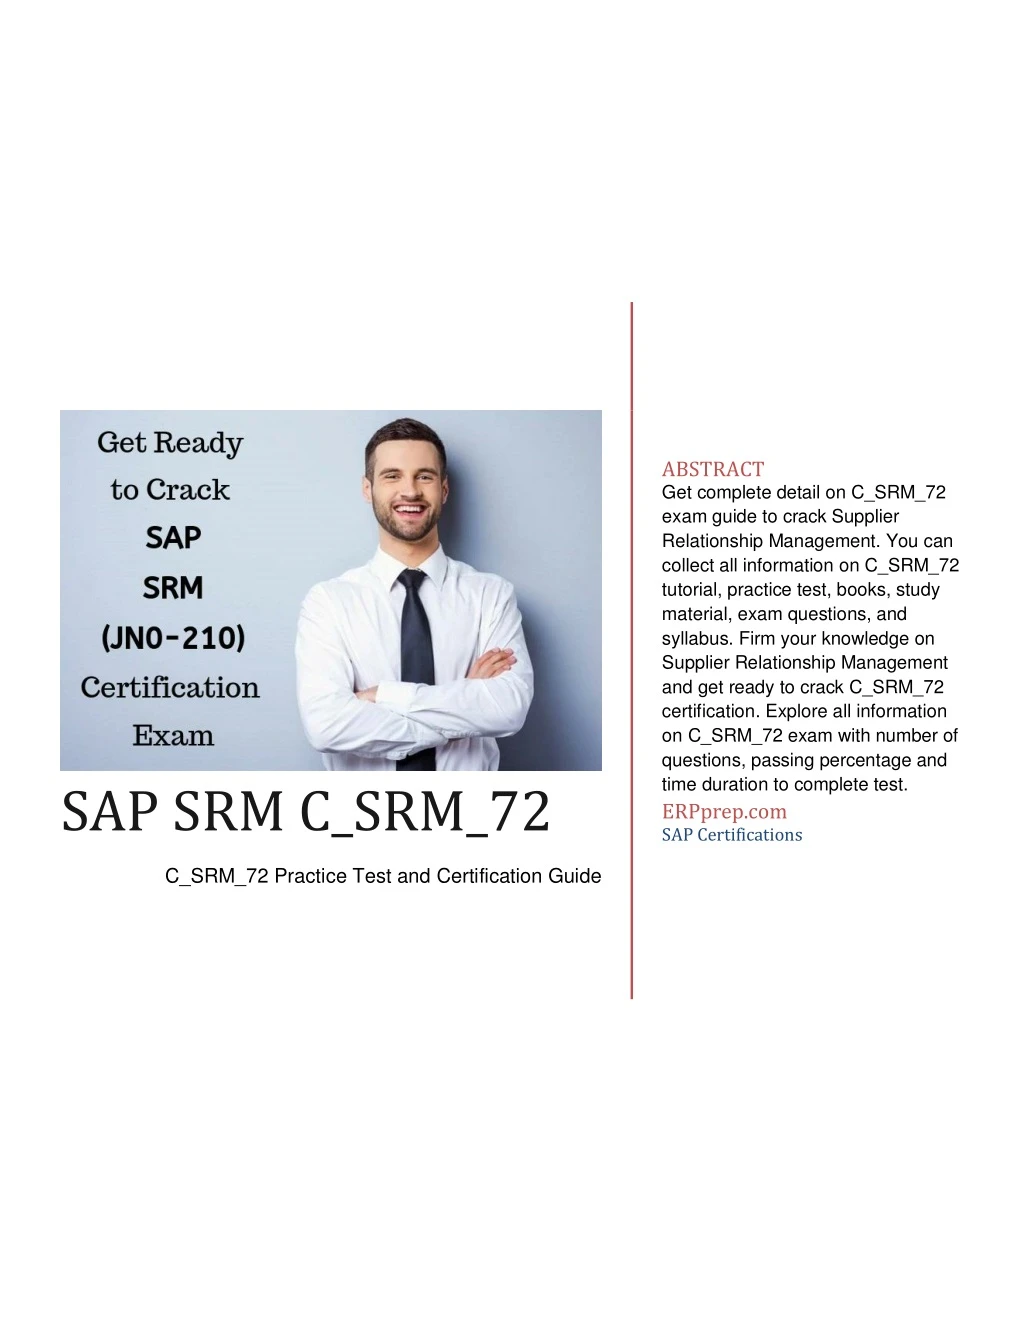 abstract get complete detail on c srm 72 exam